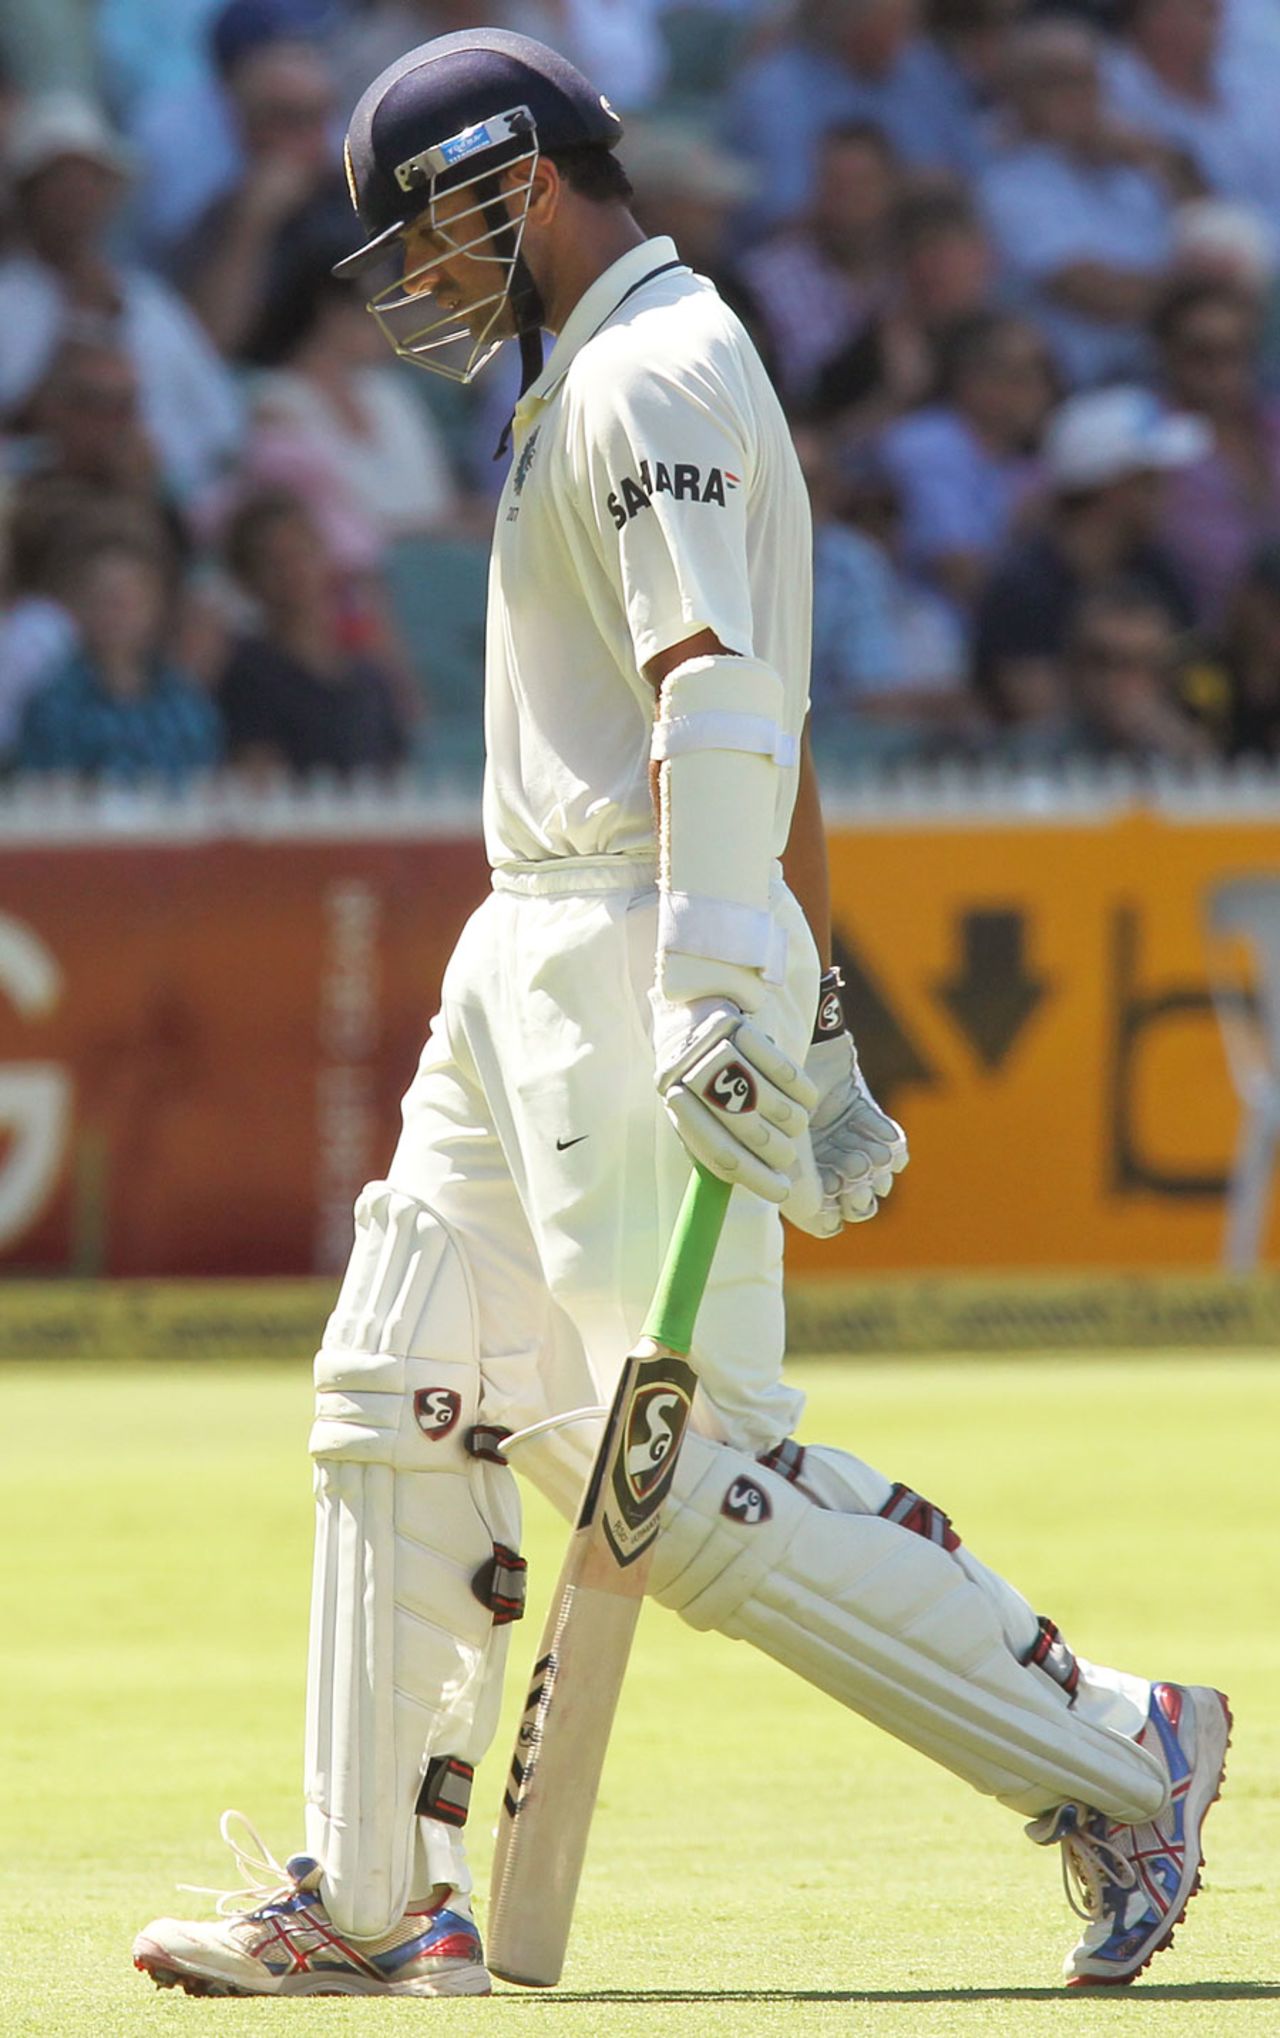 Rahul Dravid leaves the field in Adelaide, Australia v India, 4th Test, Adelaide, 4th day, January 27, 2012